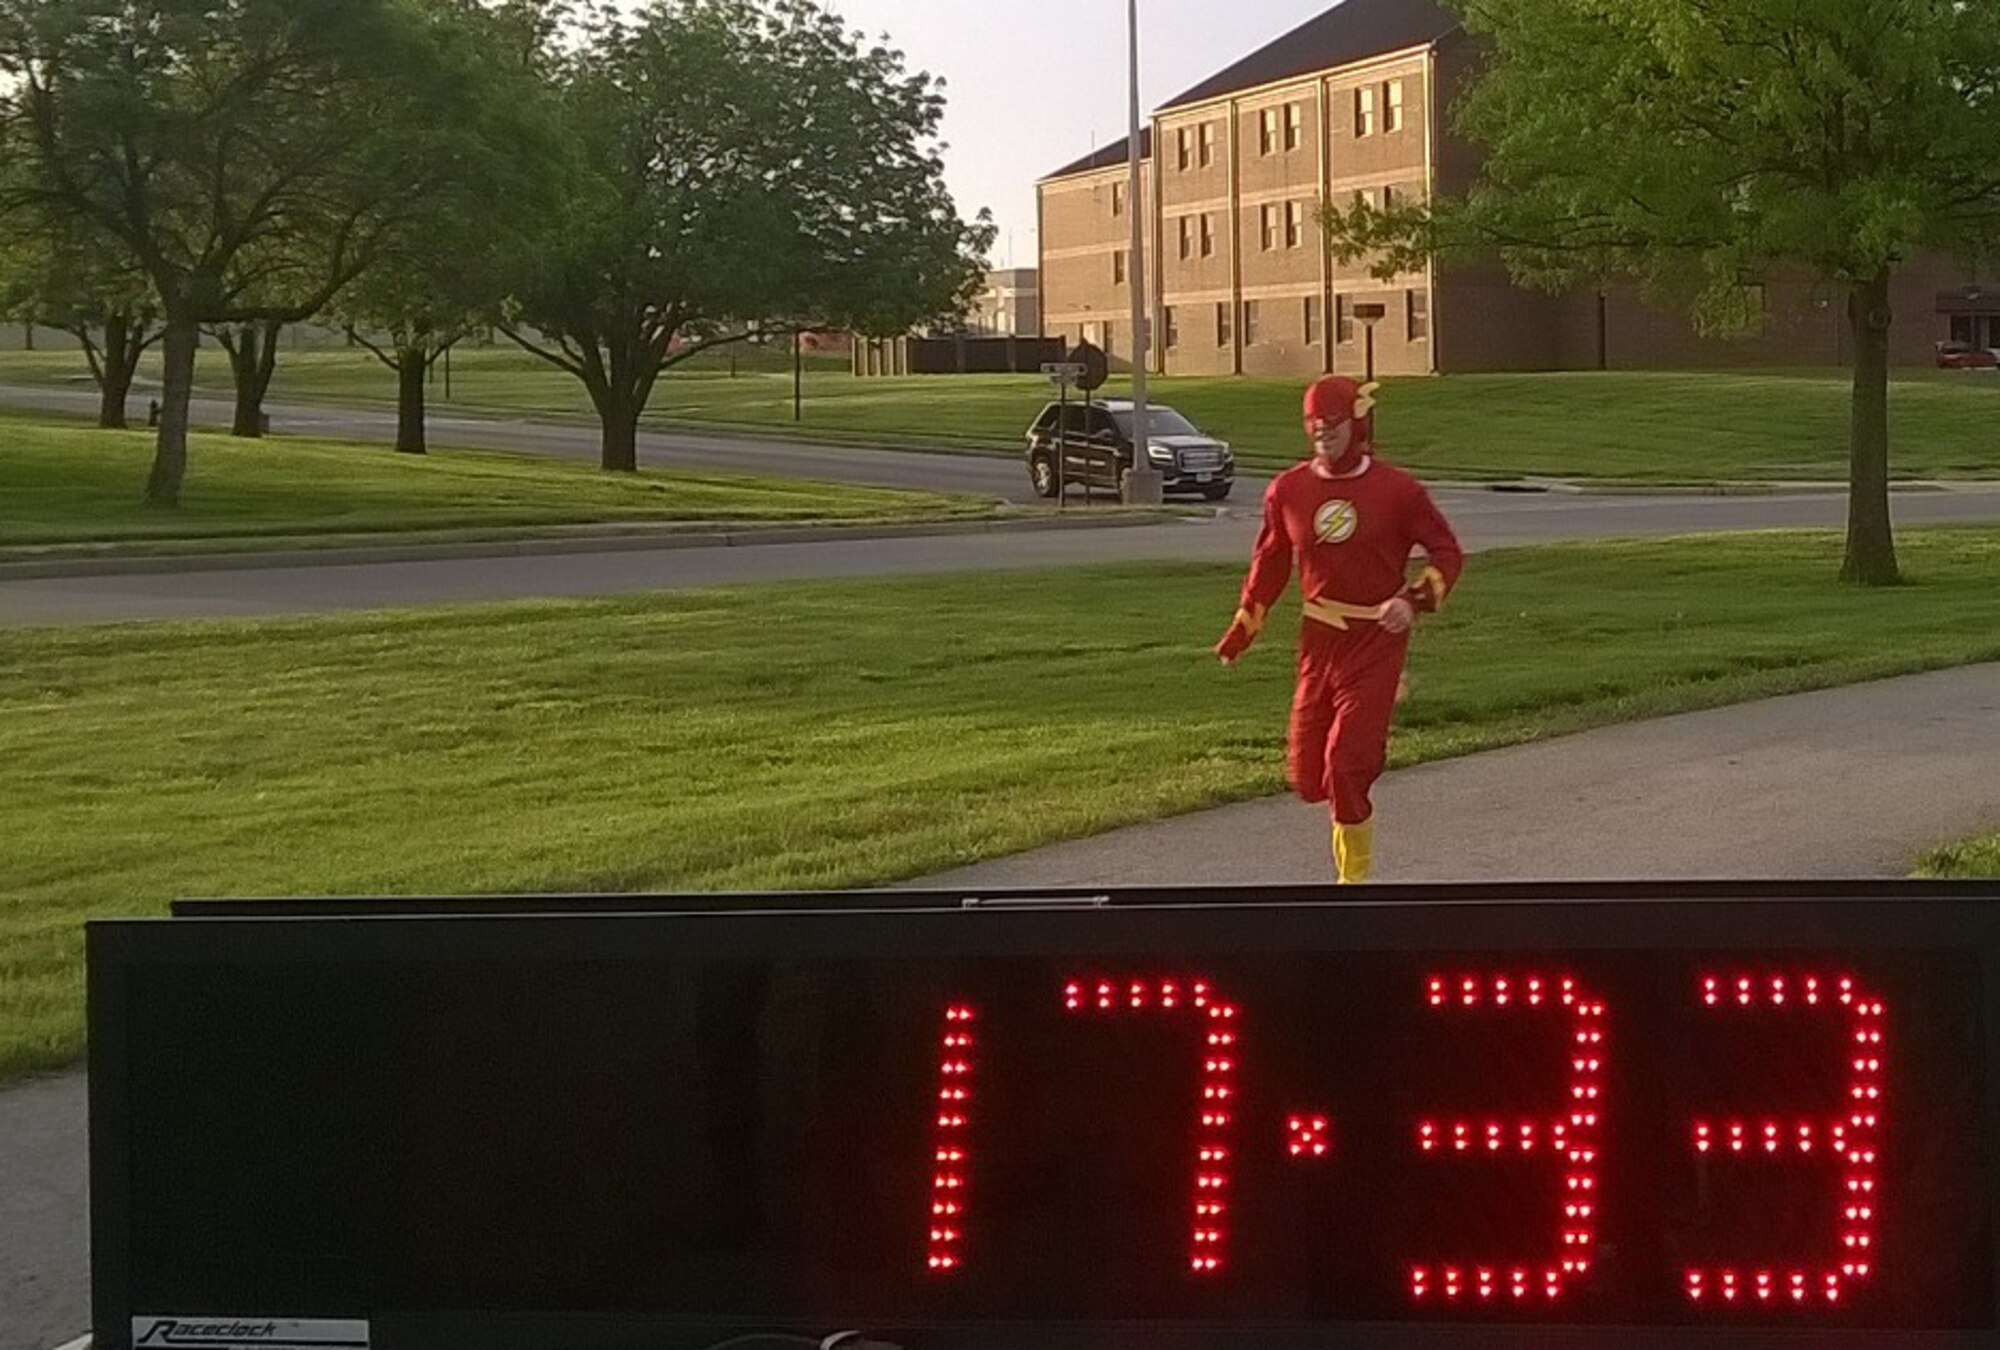 A masked runner crosses the finish line in first place during the 5K Race for Respect at Whiteman Air Force Base, Mo., April 29, 2016. Members of Team Whiteman are encouraged to act like superheroes by choosing to step up, stand up and speak up. (Courtesy photo)